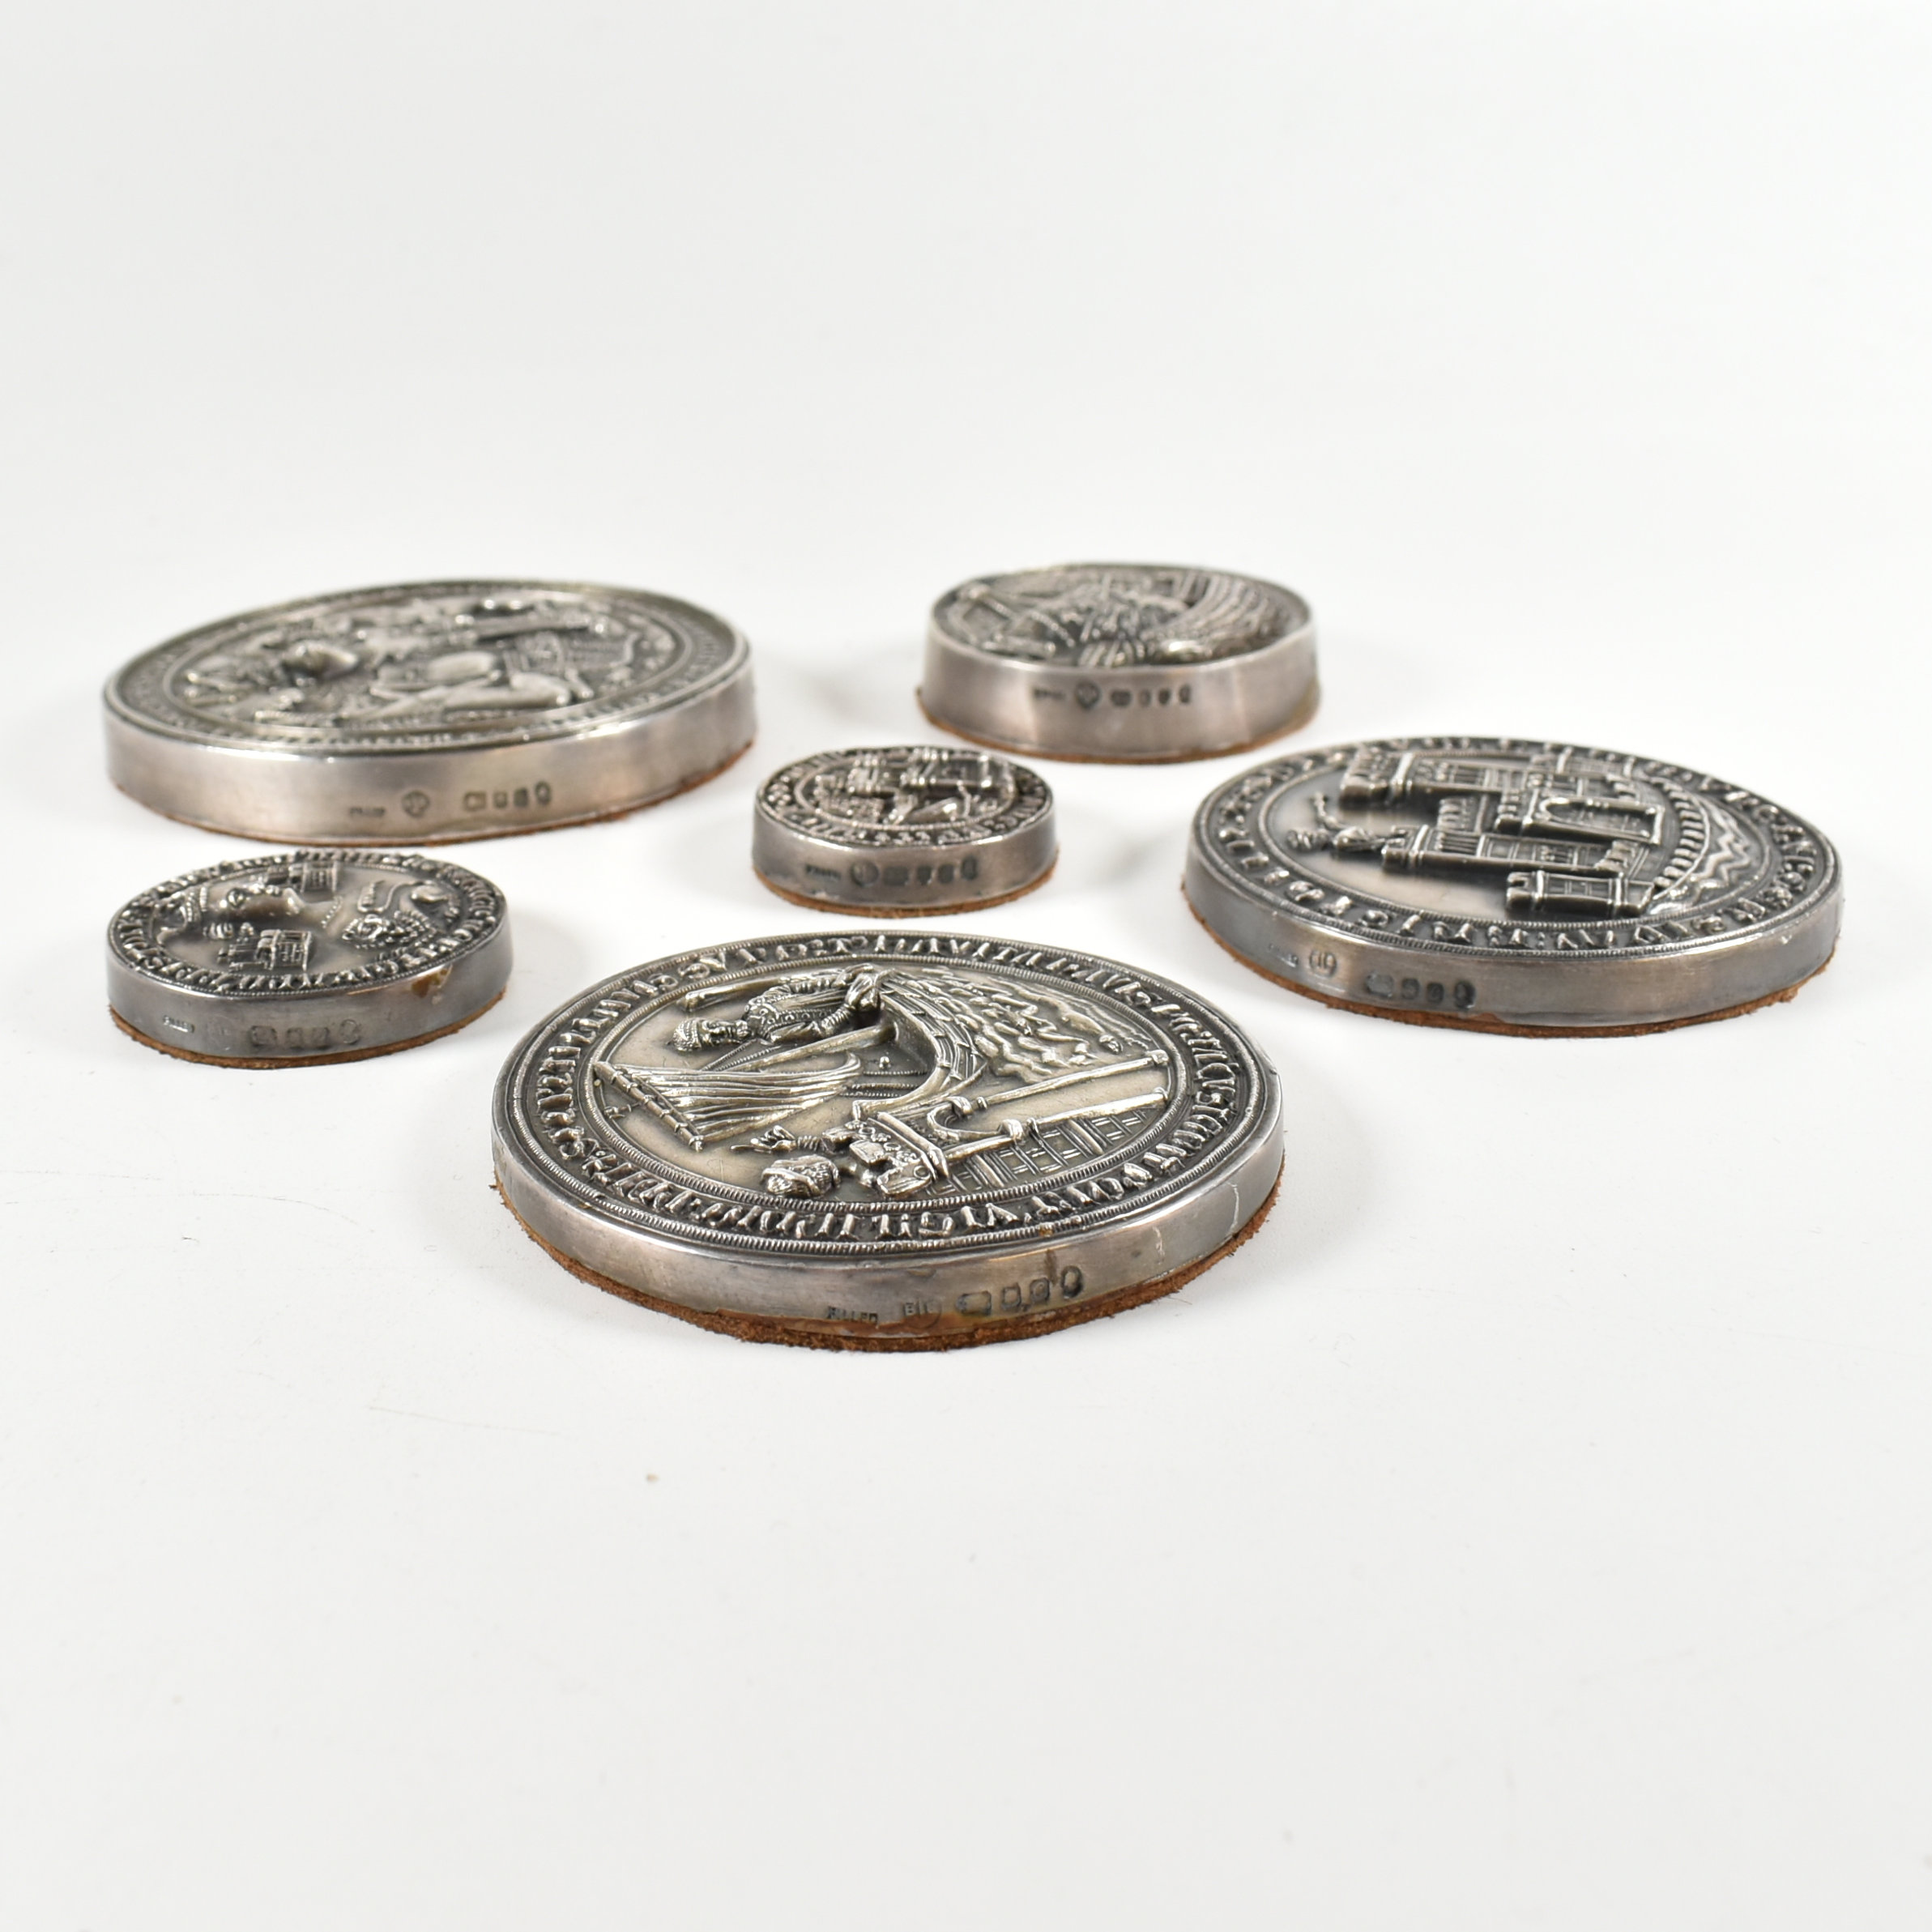 HALLMARKED SILVER MOUNTED REPLICA SEALS BURGESSES OF BRISTOL - Image 13 of 13